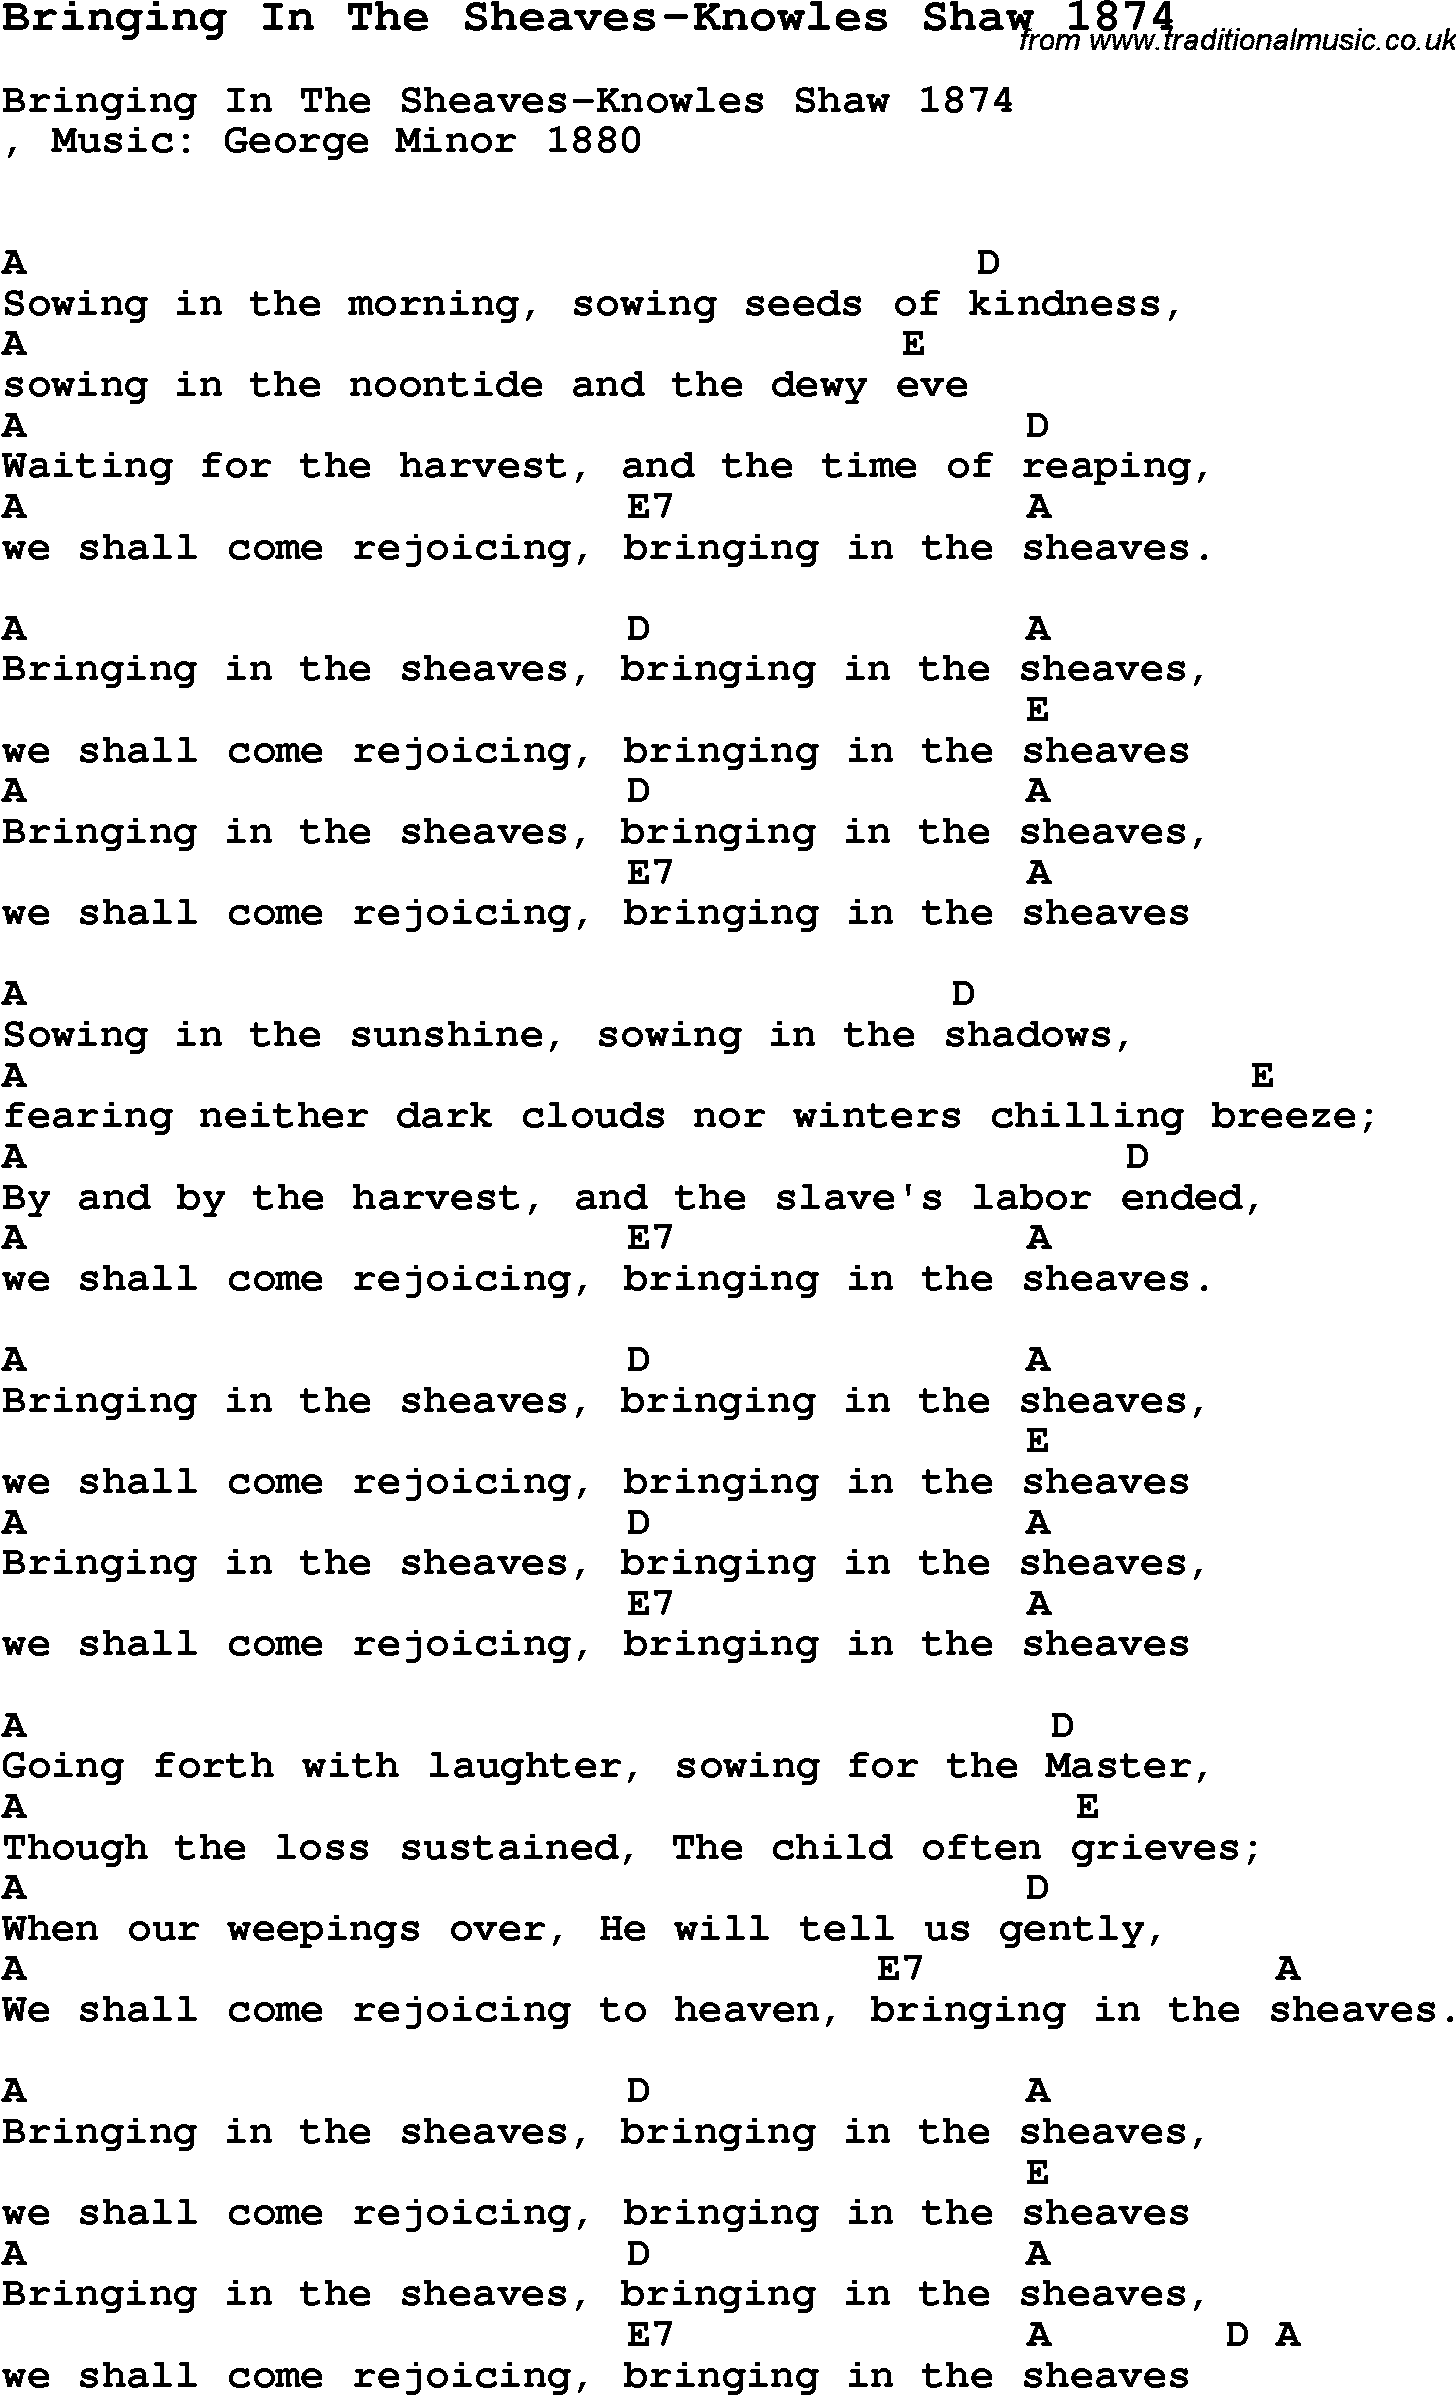 Summer-Camp Song, Bringing In The Sheaves-Knowles Shaw 1874, with lyrics and chords for Ukulele, Guitar Banjo etc.